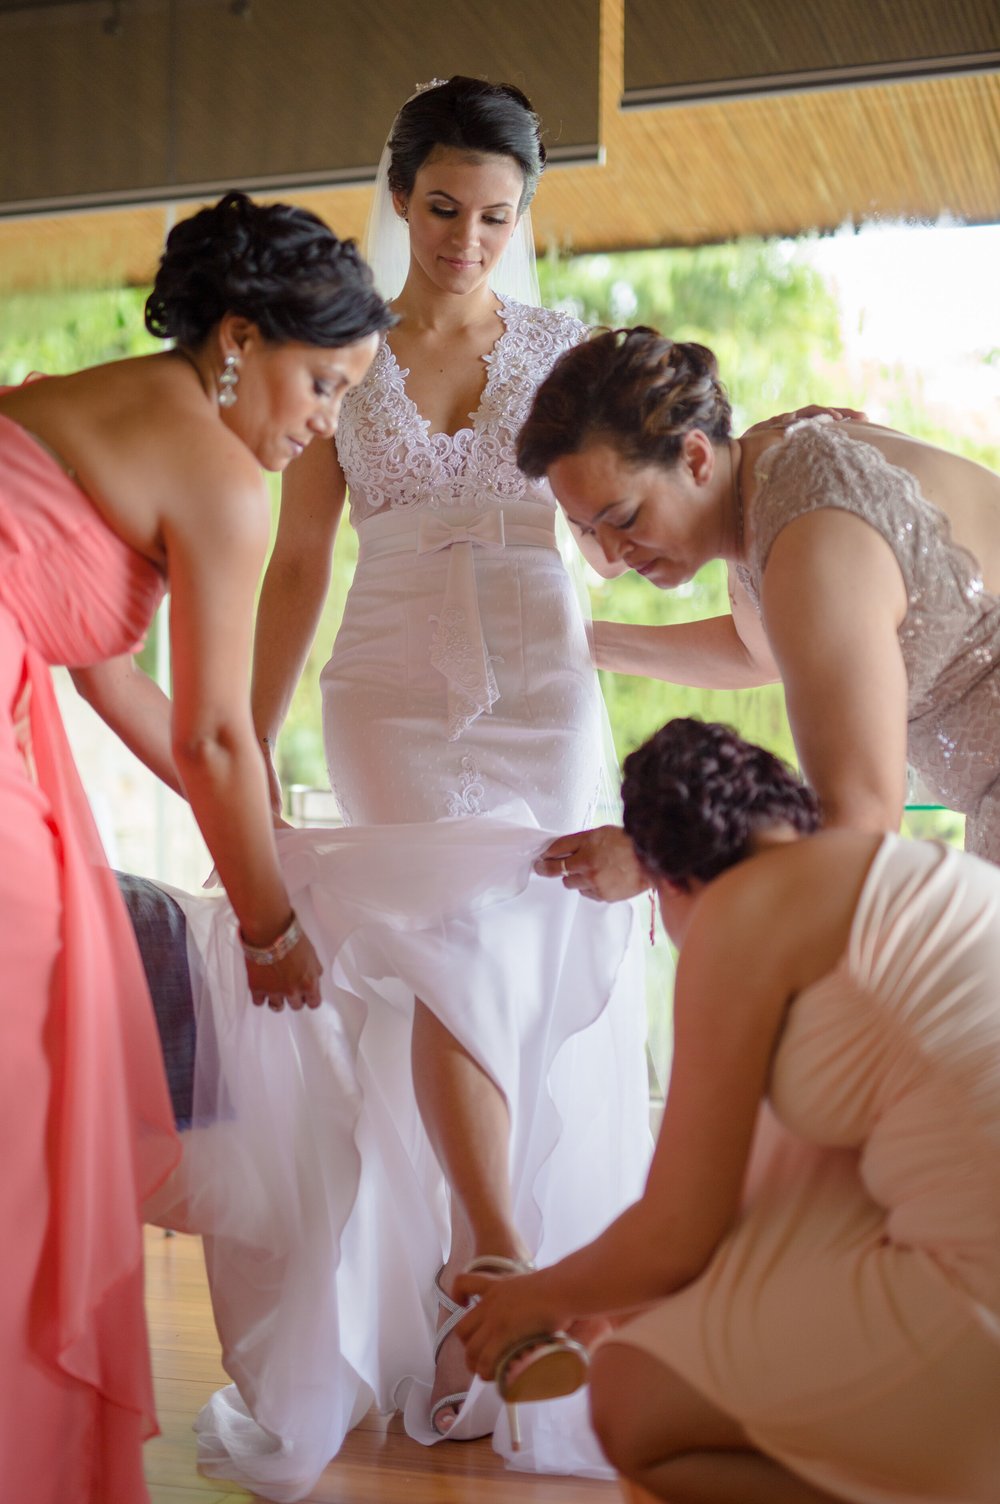 bride-putting-on-shoes-bride-and-bridesmaids.jpg